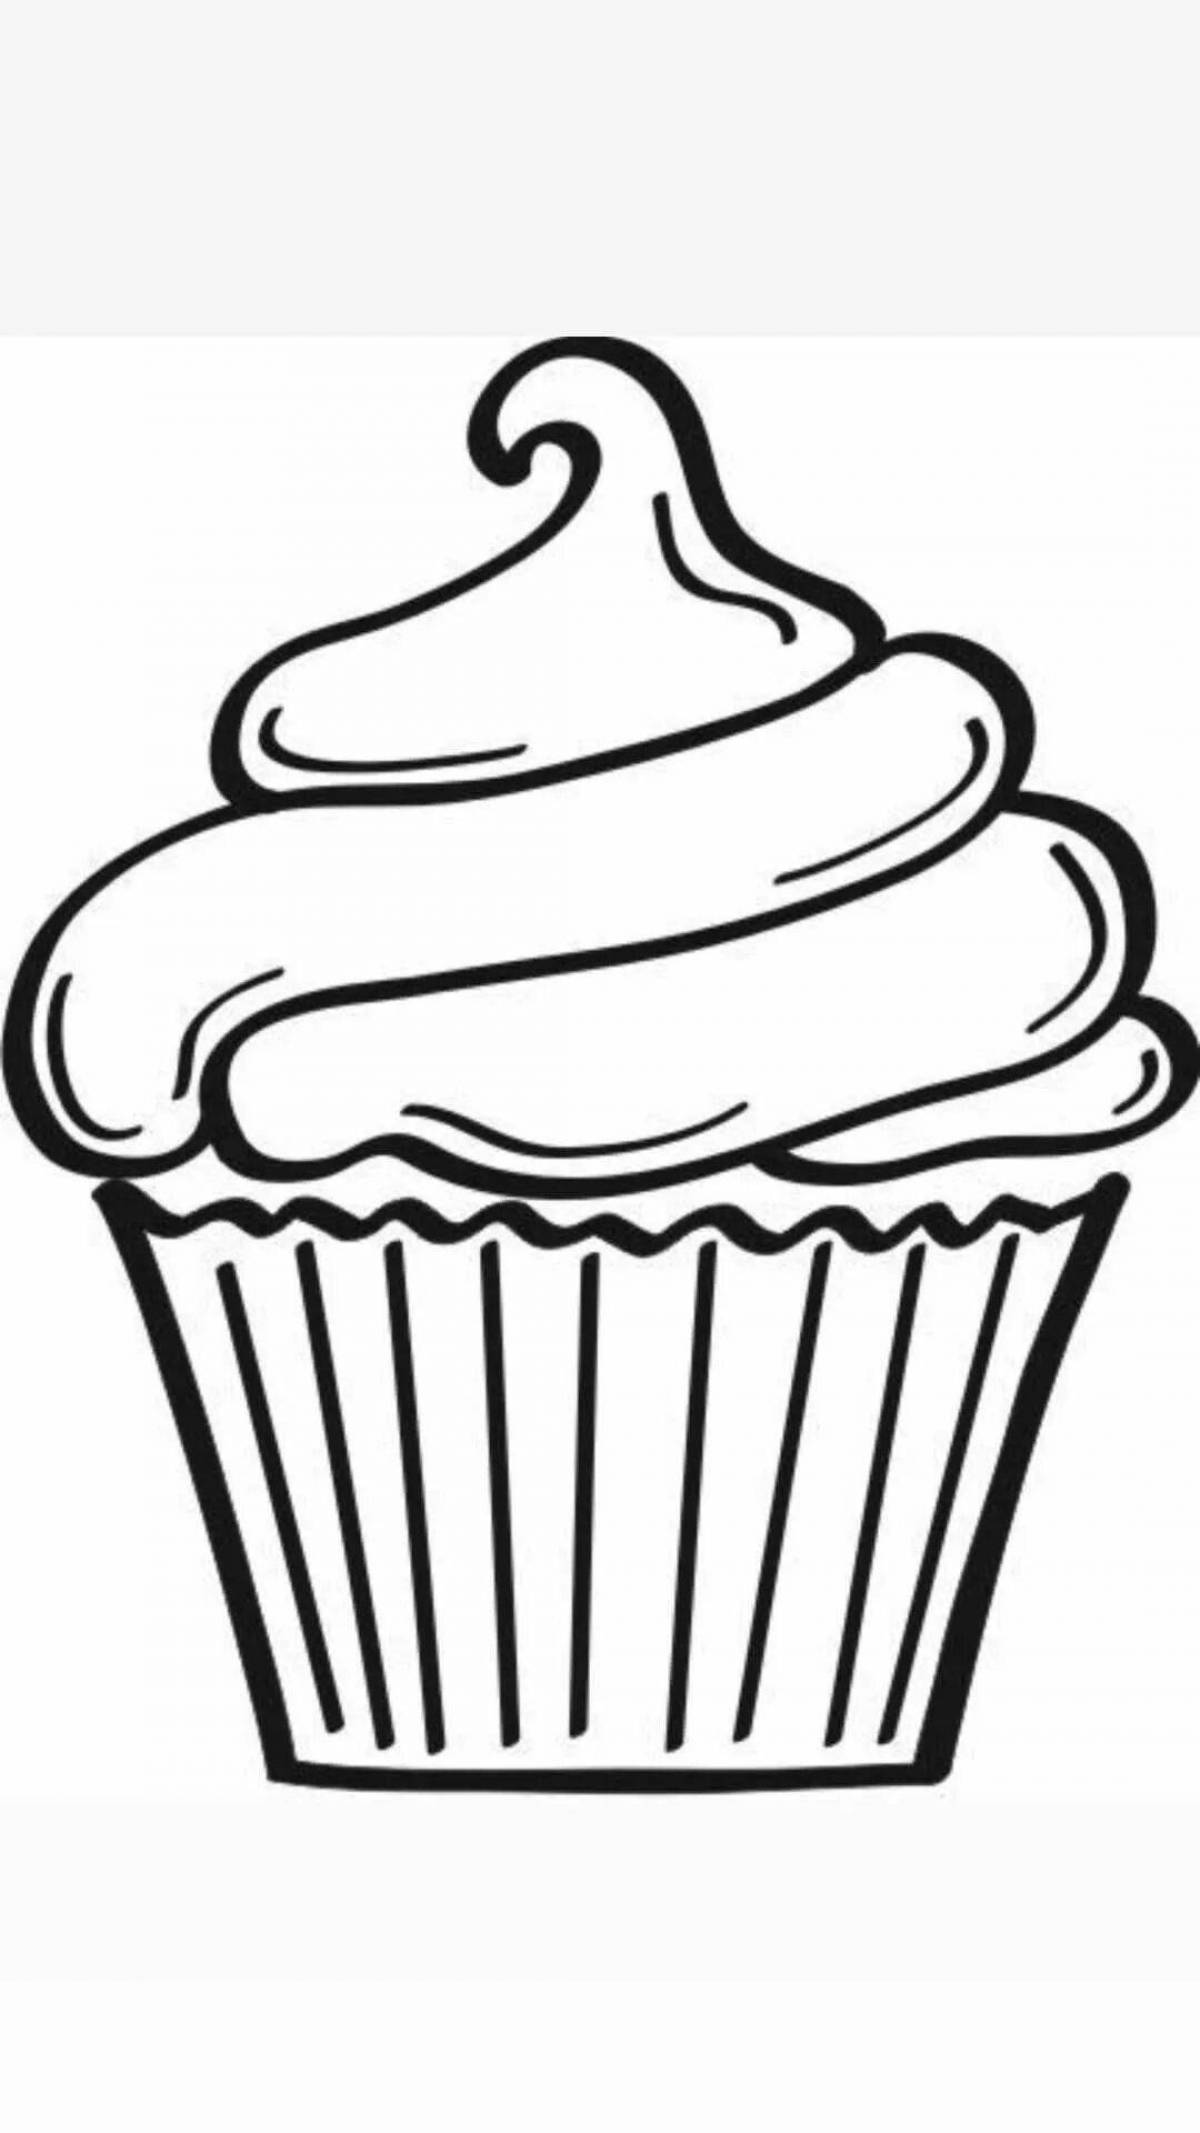 Colorful cupcakes coloring pages for kids